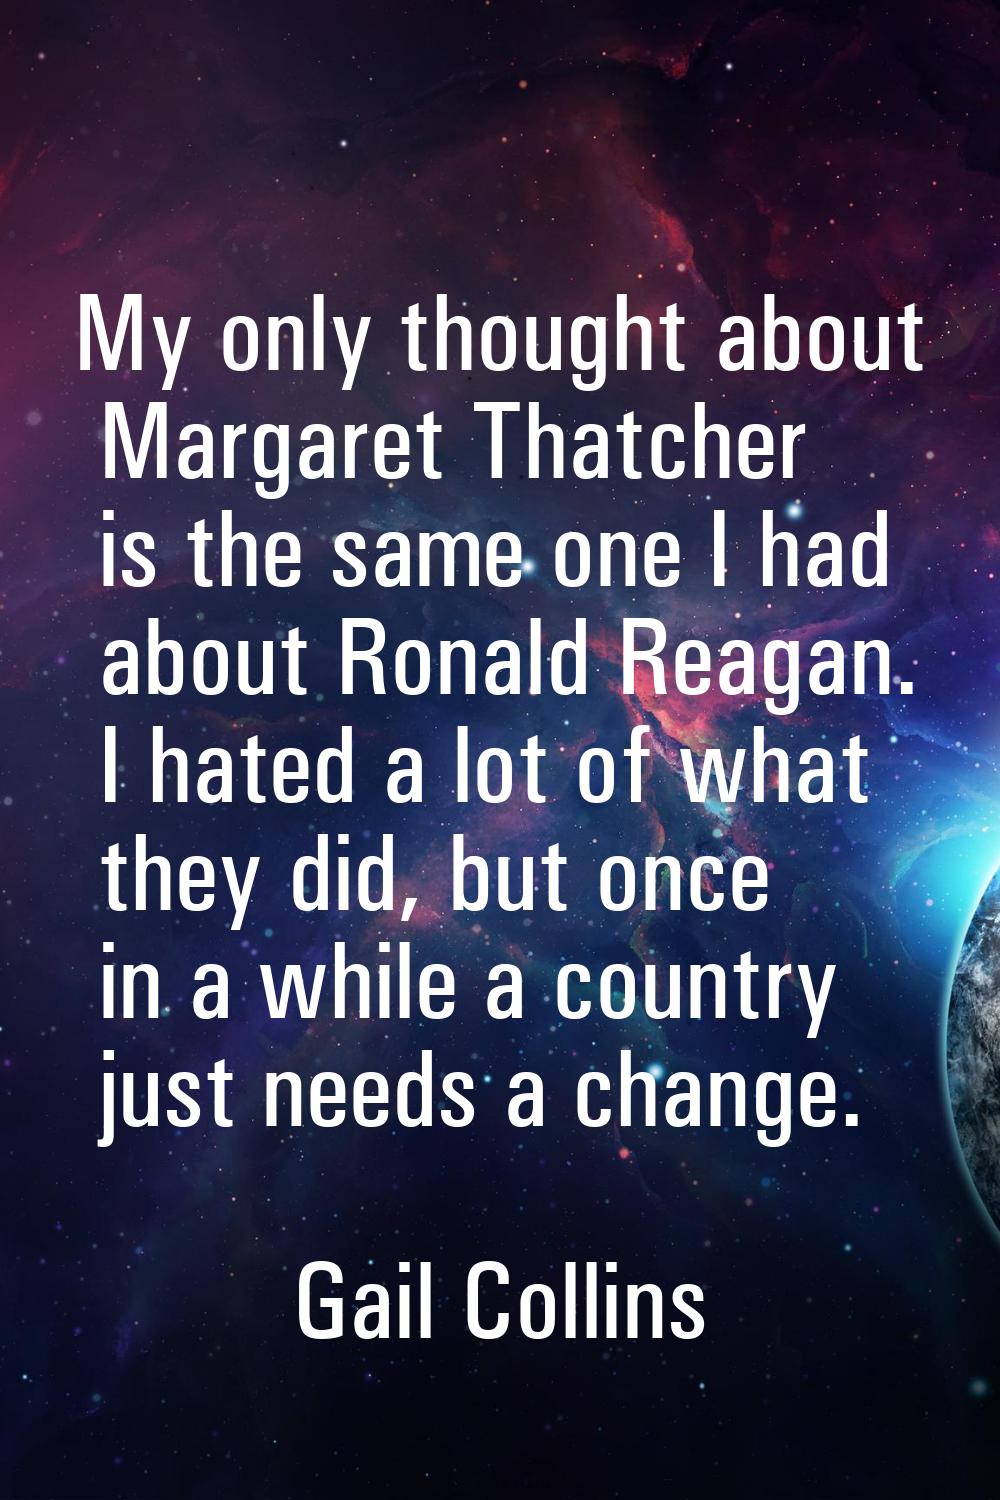 My only thought about Margaret Thatcher is the same one I had about Ronald Reagan. I hated a lot of